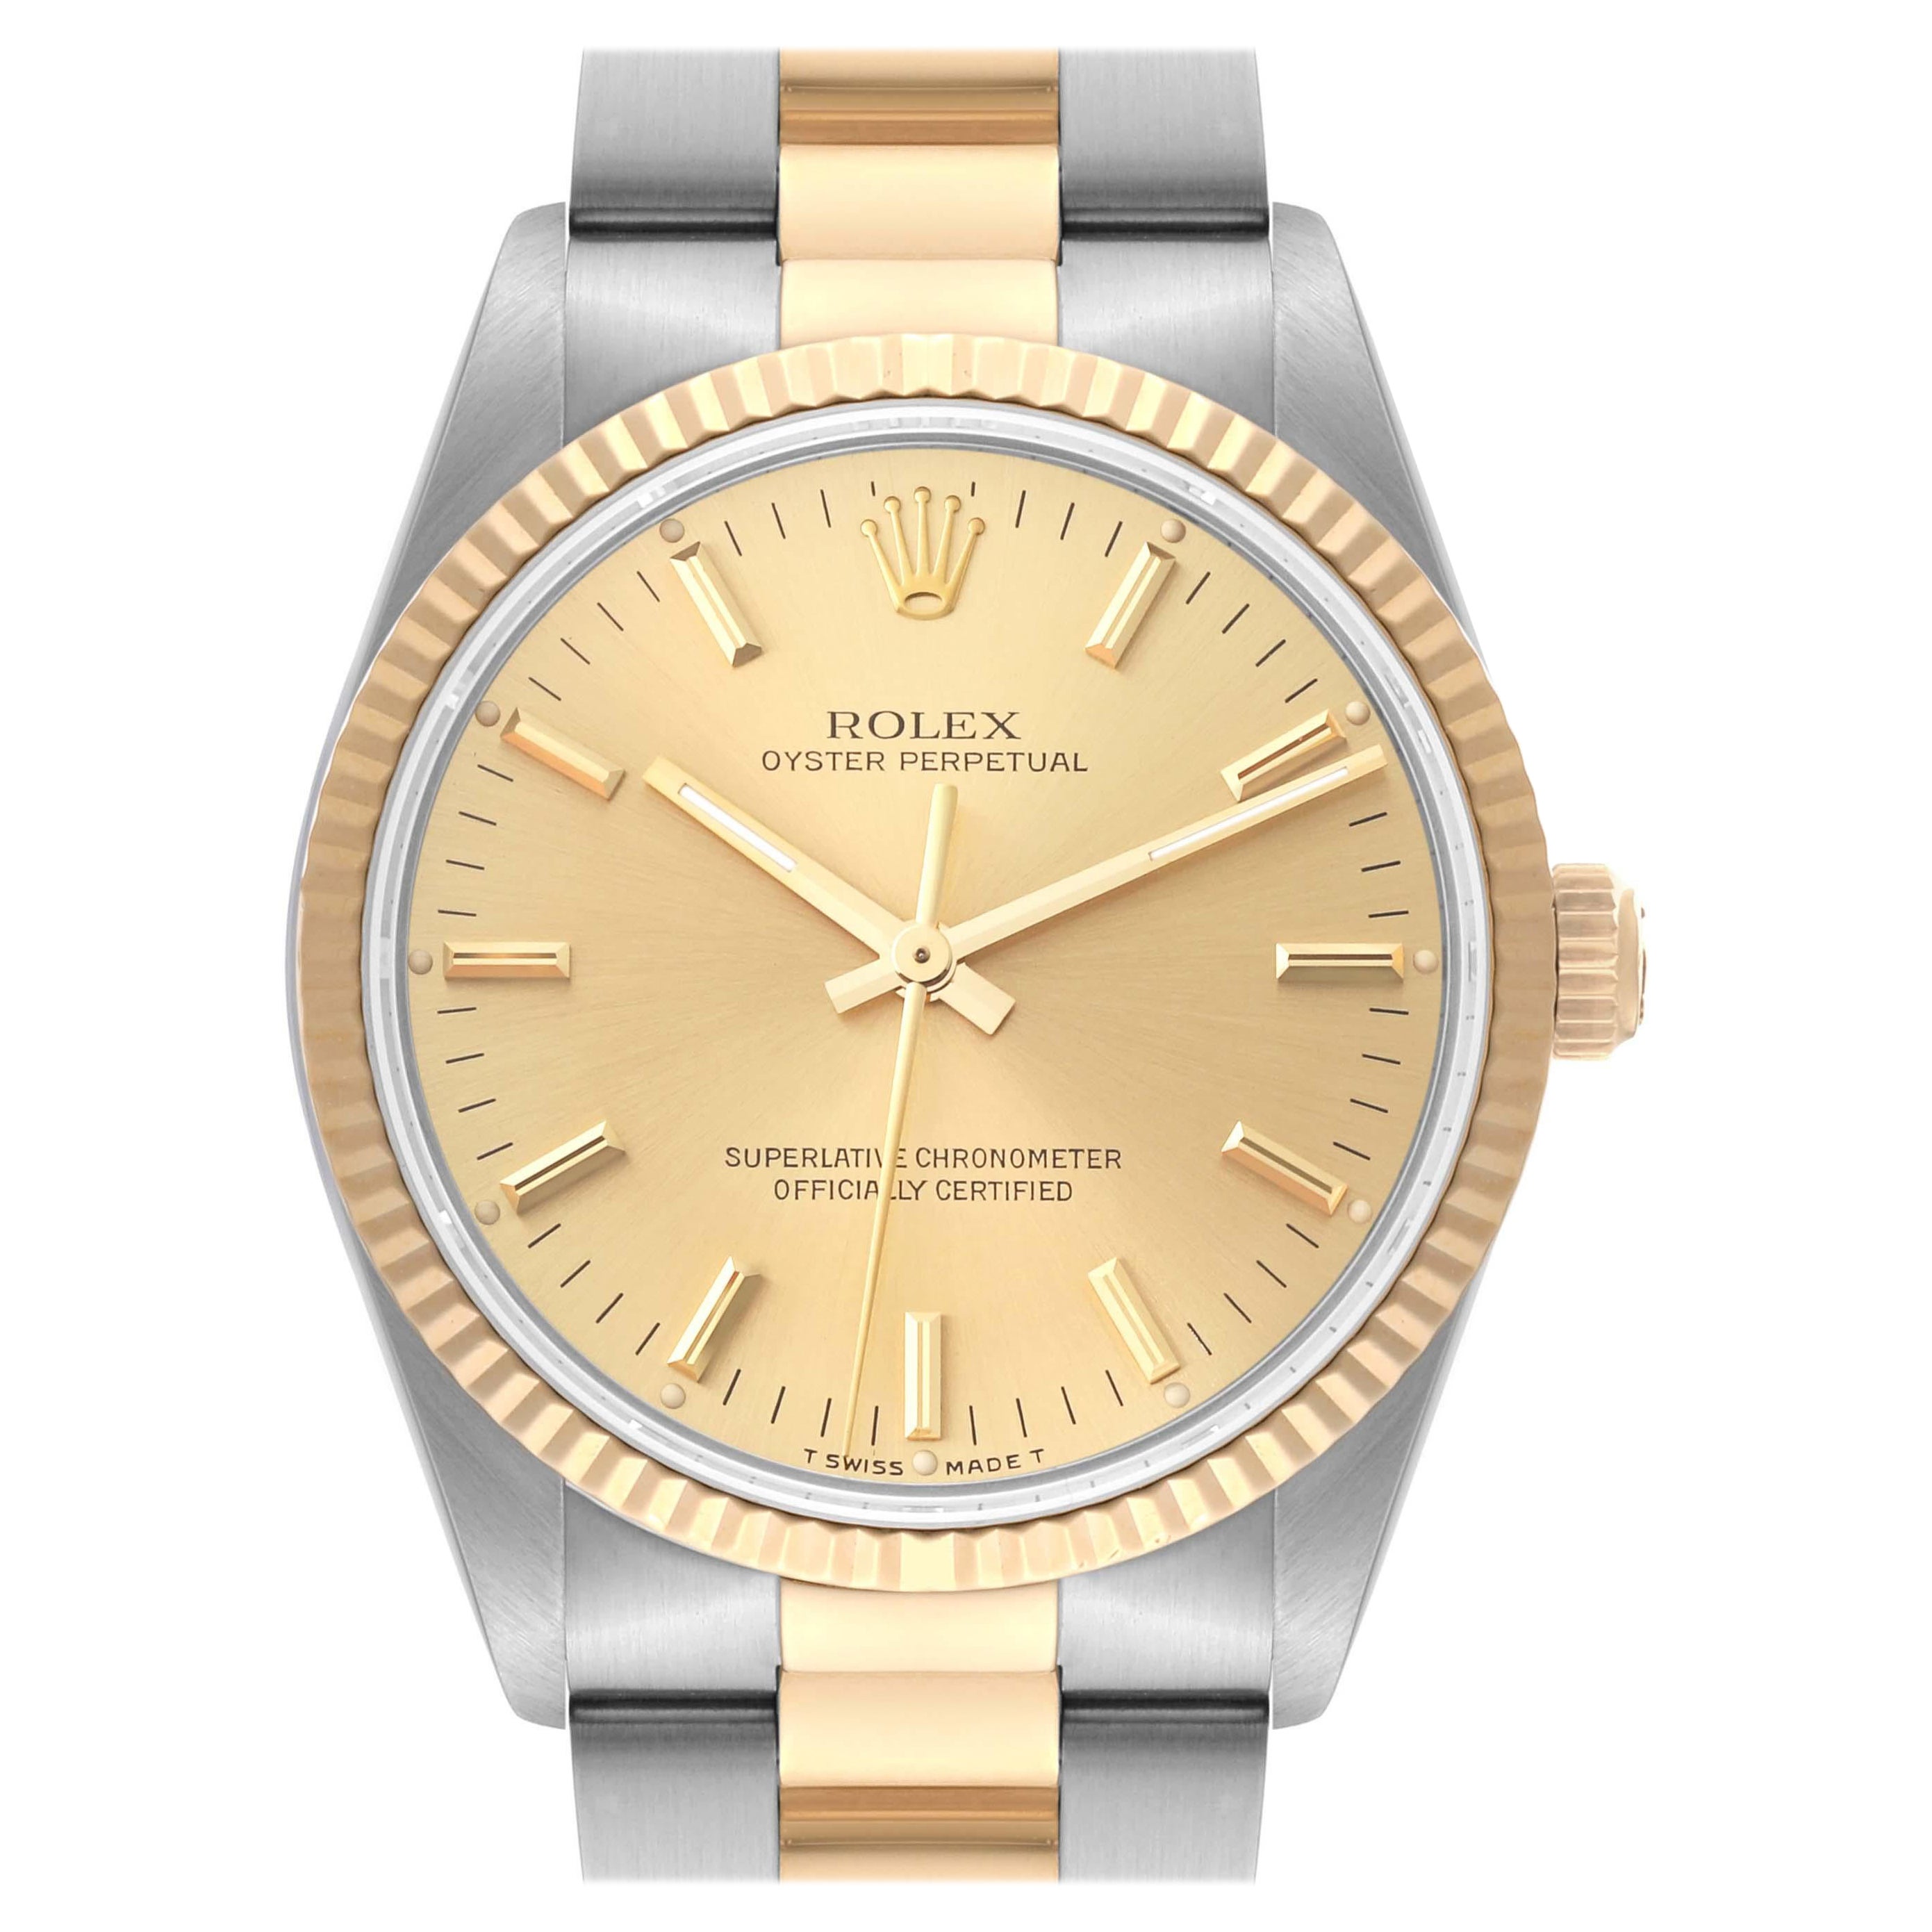 Rolex Oyster Perpetual Fluted Bezel Steel Yellow Gold Mens Watch 14233